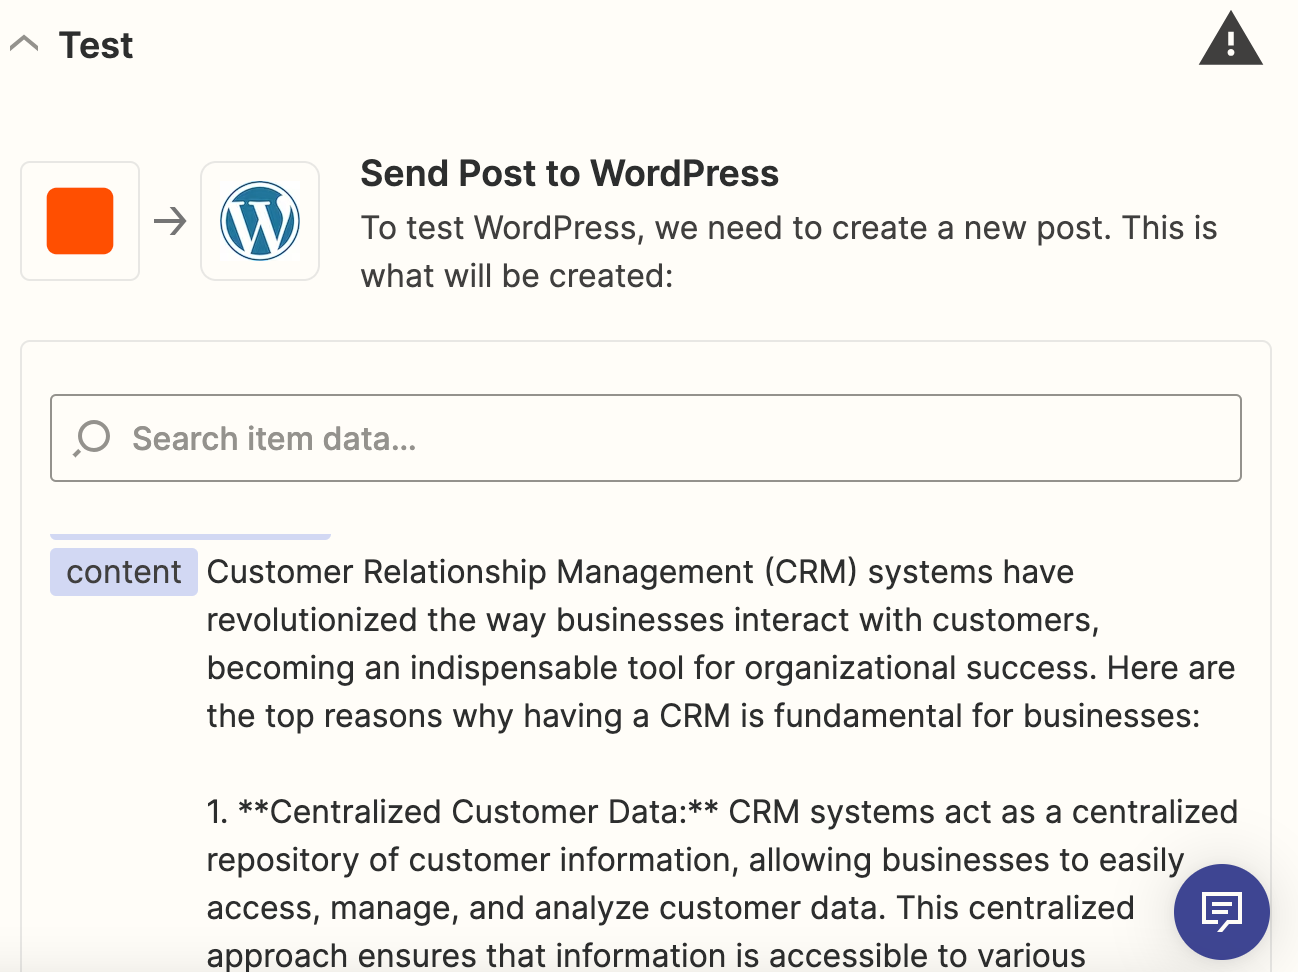 A test step that shows information being sent to WordPress for a WordPress post.